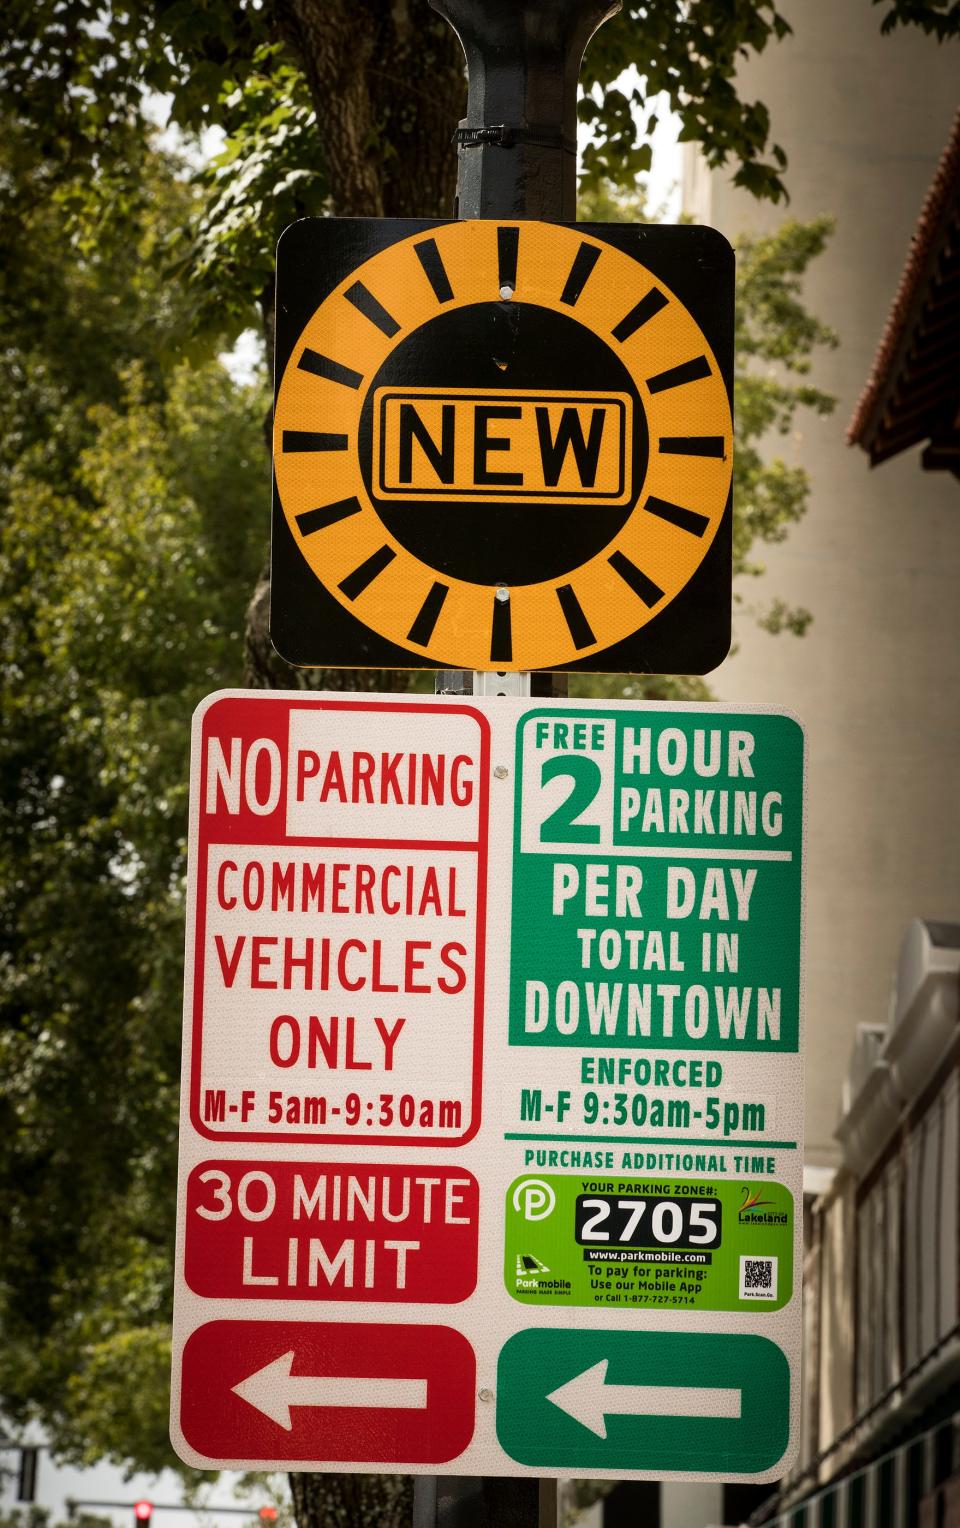 "A lot of the signage we have downtown is word vomit," said Jason Ehrlich, the city's parking services supervisor.